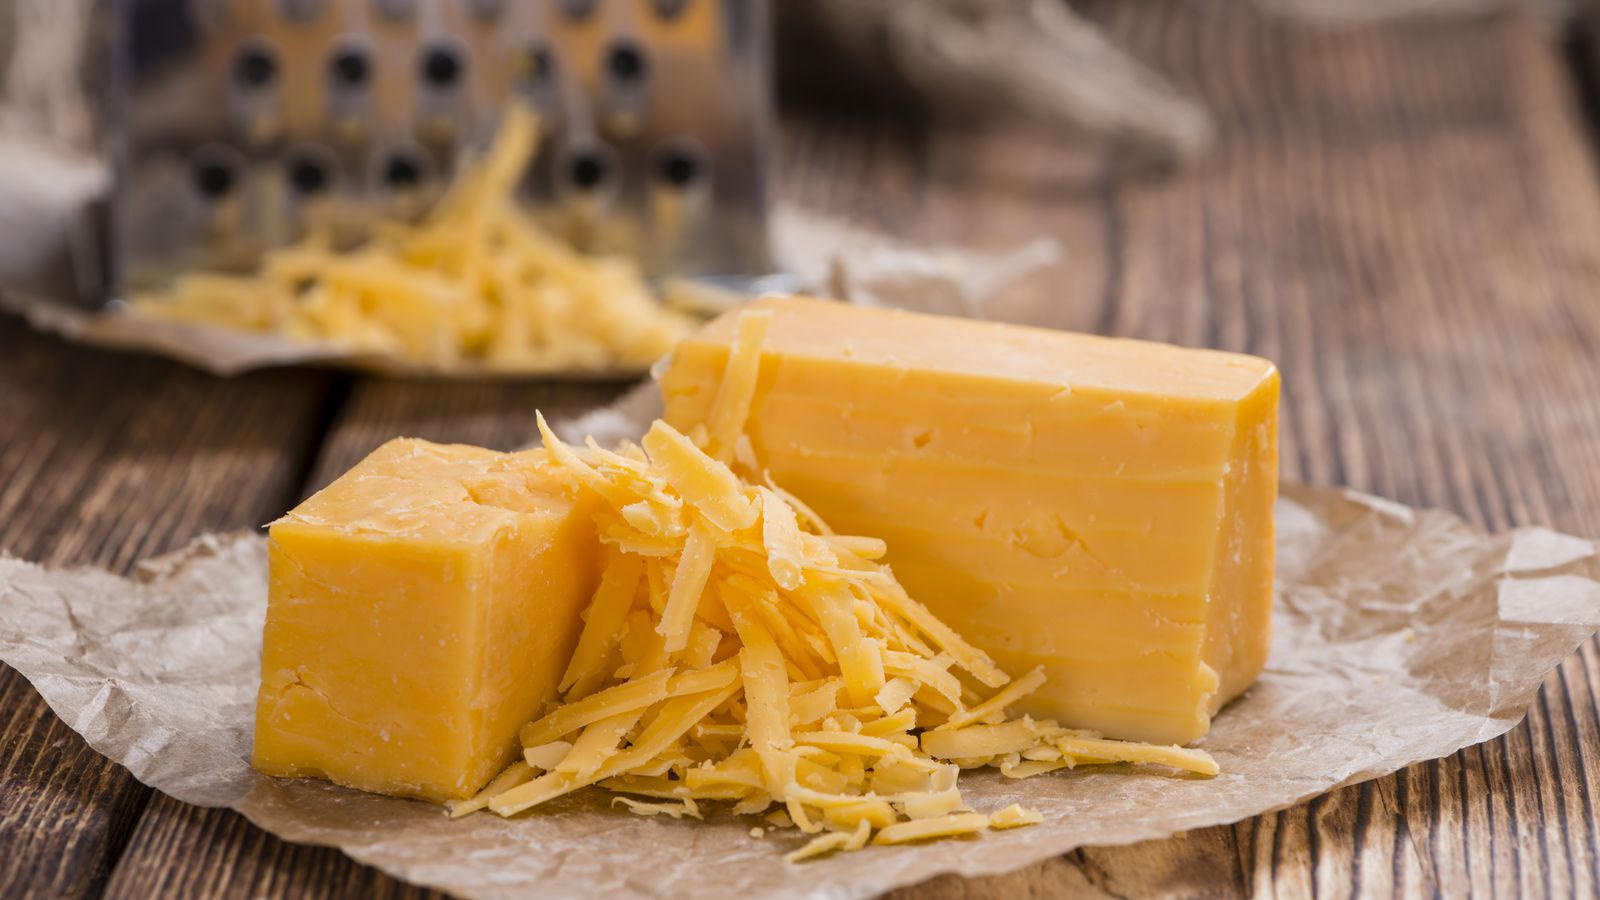 America now has 1.2 billion pounds of excess cheese